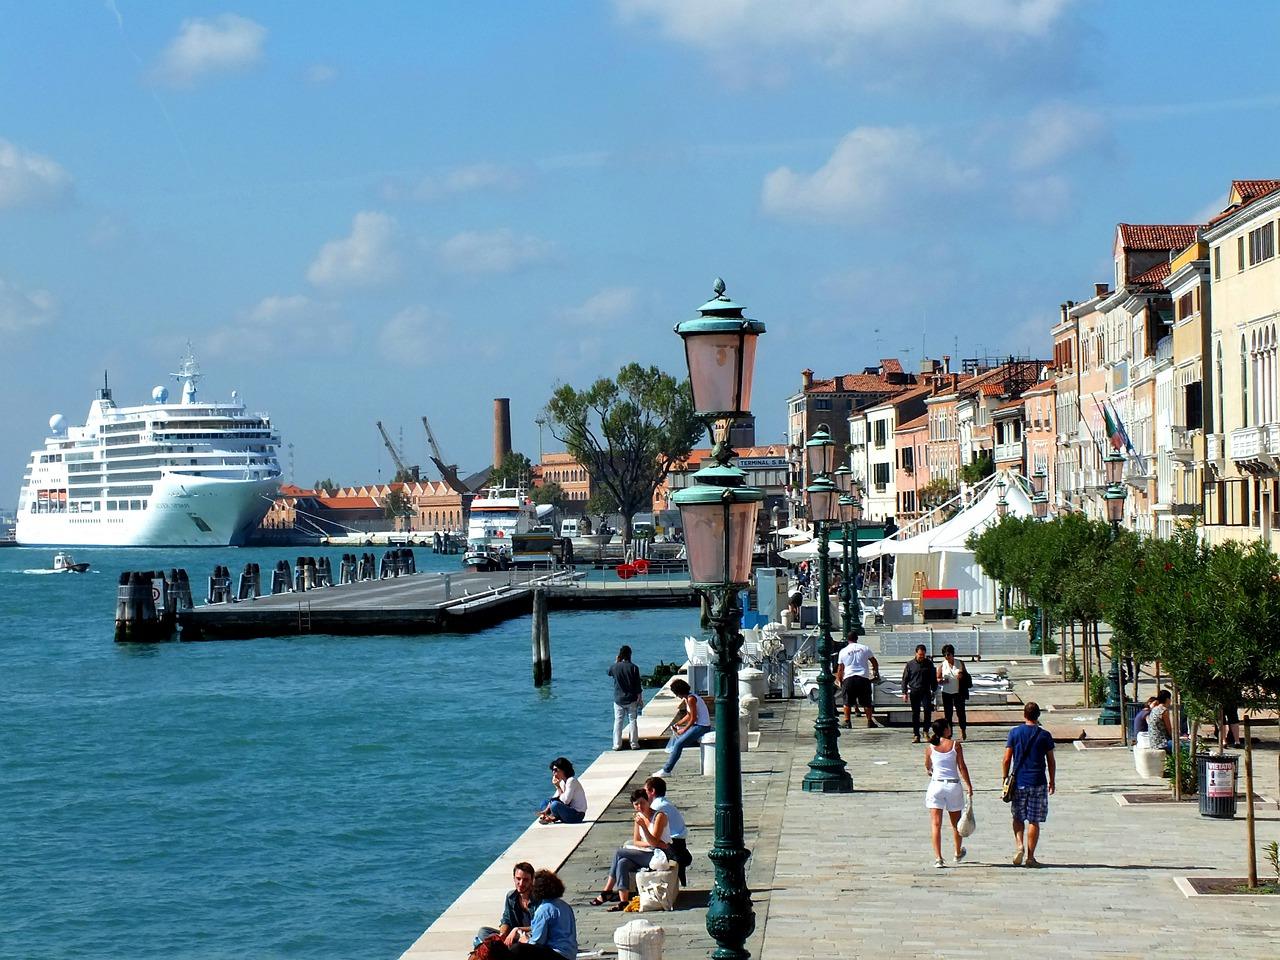 Cruise ships banned from Venice's lagoon